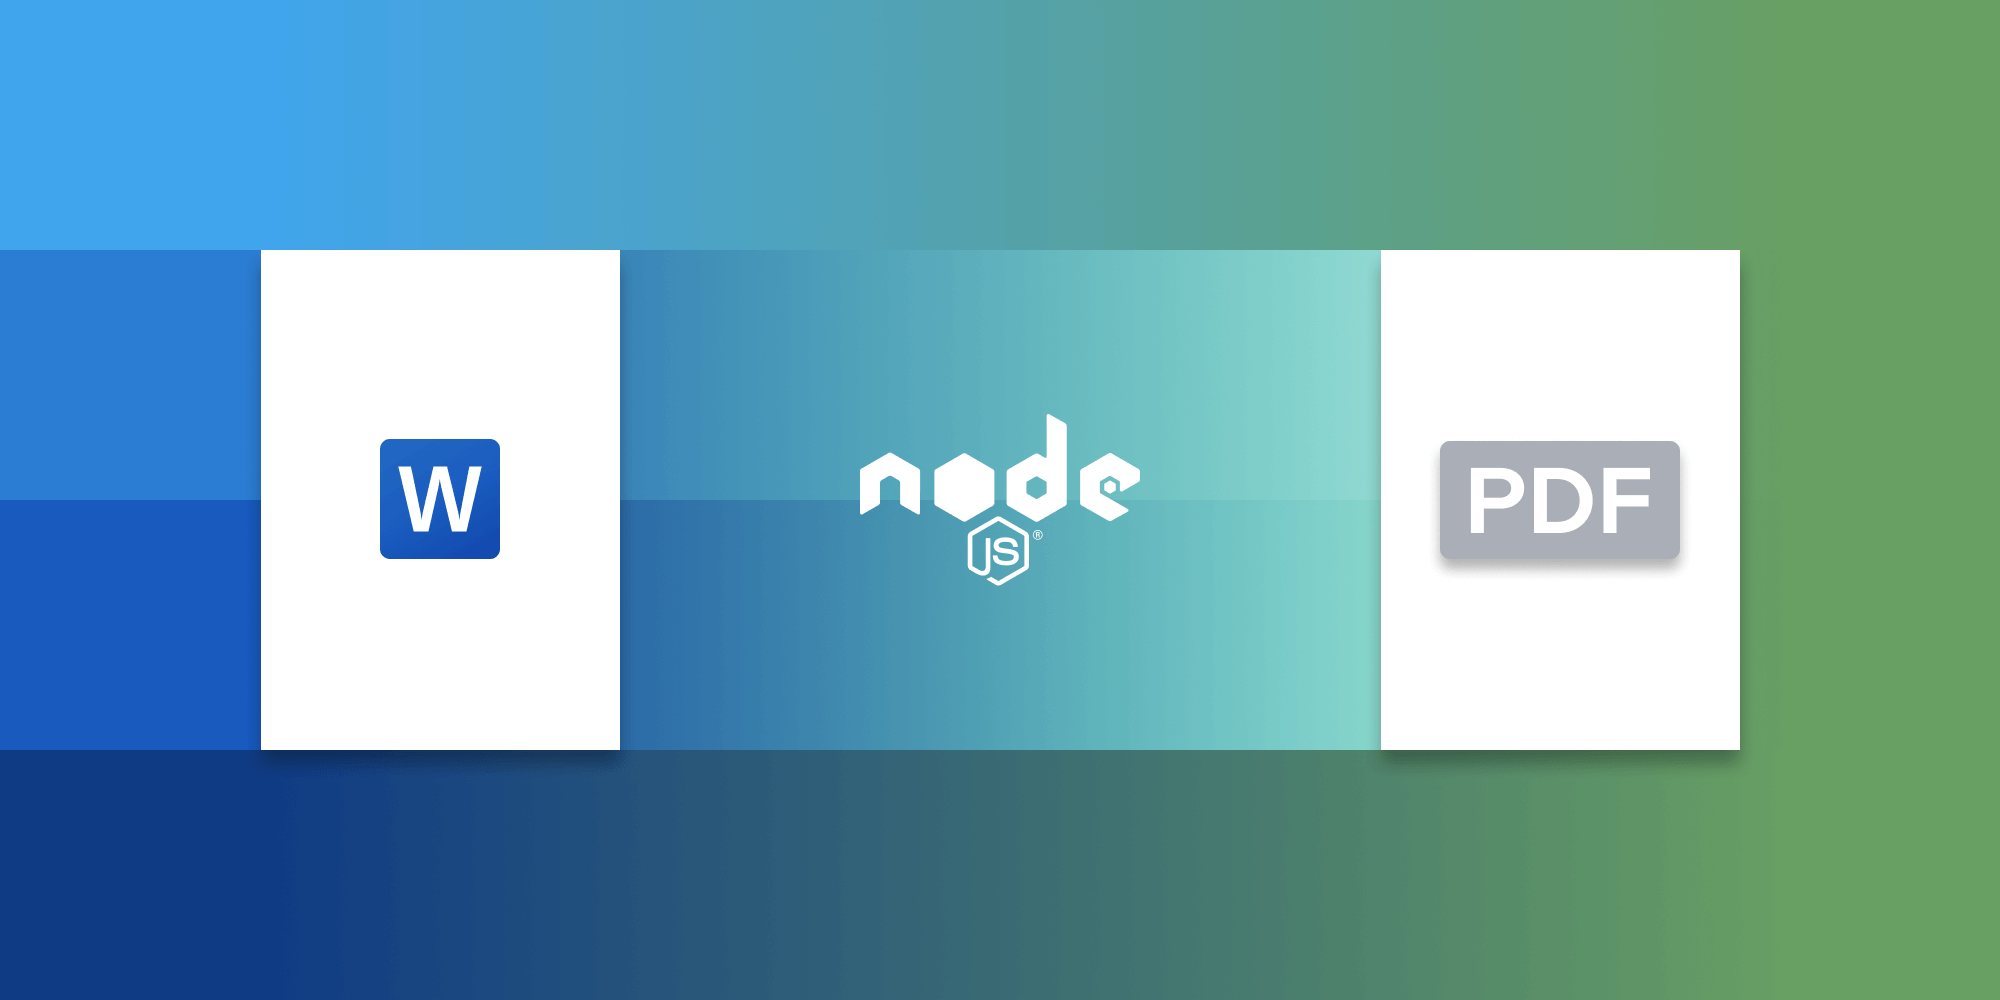 Illustration: How to Convert Word (DOC/DOCX) to PDF Using Node.js